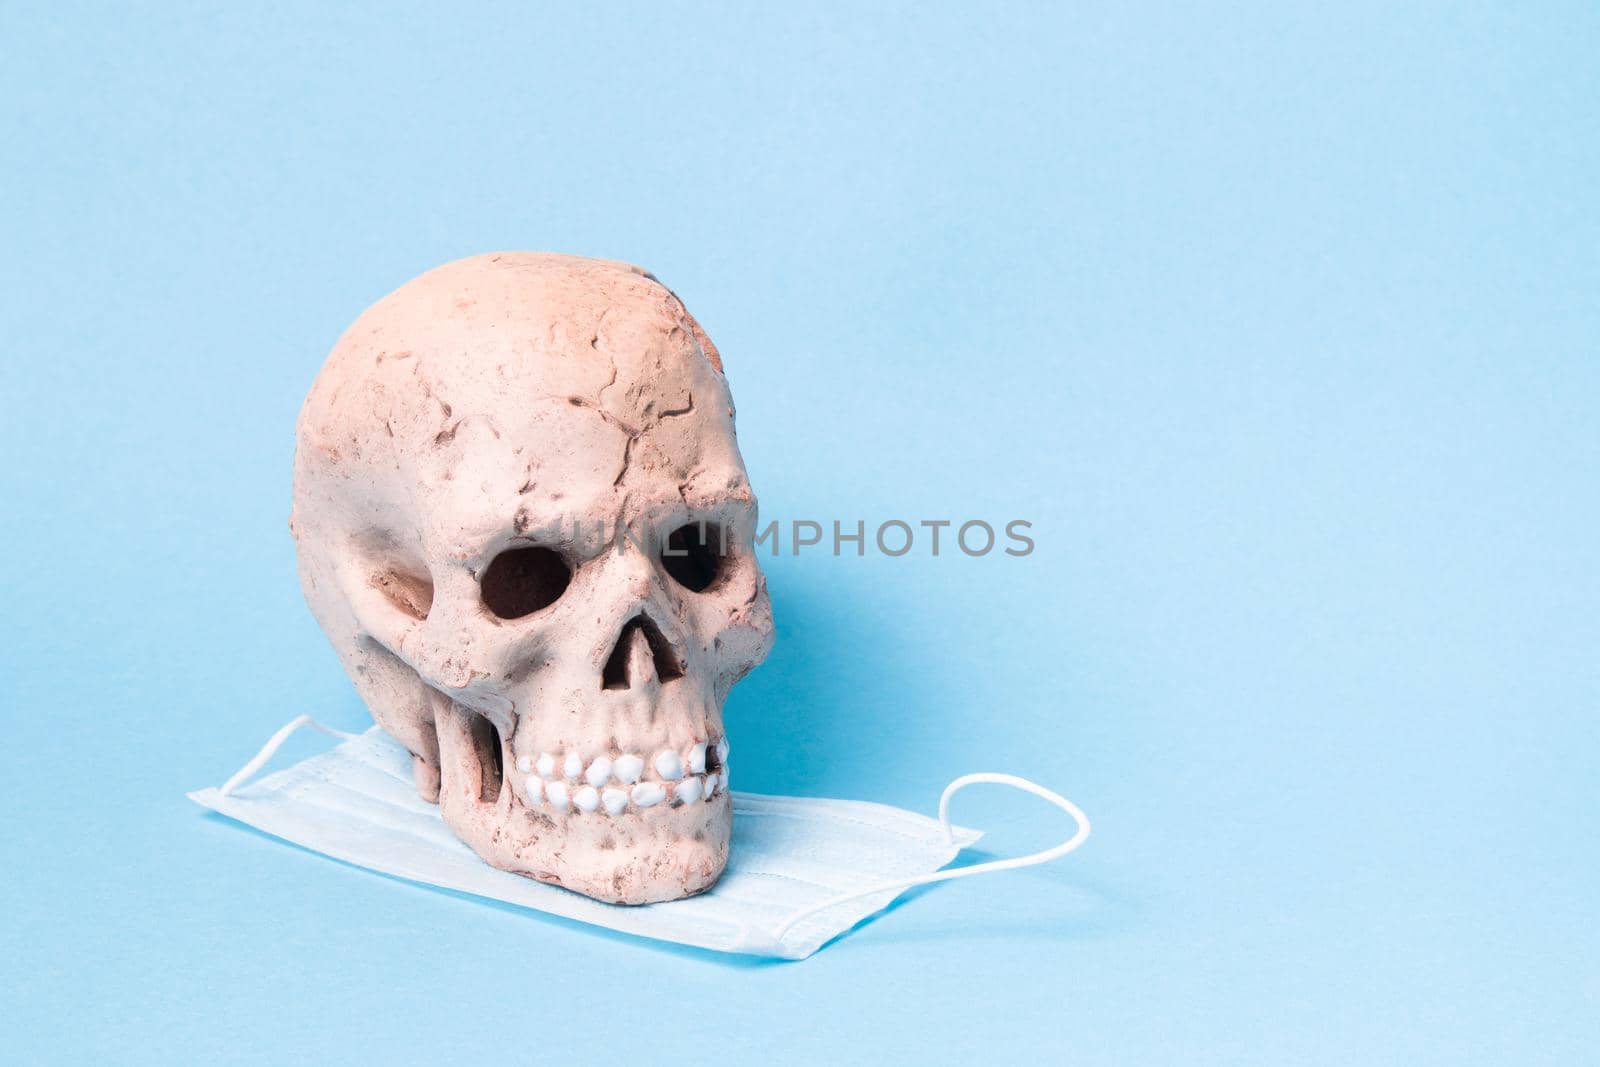 ceramic skull and blue protective medical face mask on a blue background, copy space by natashko